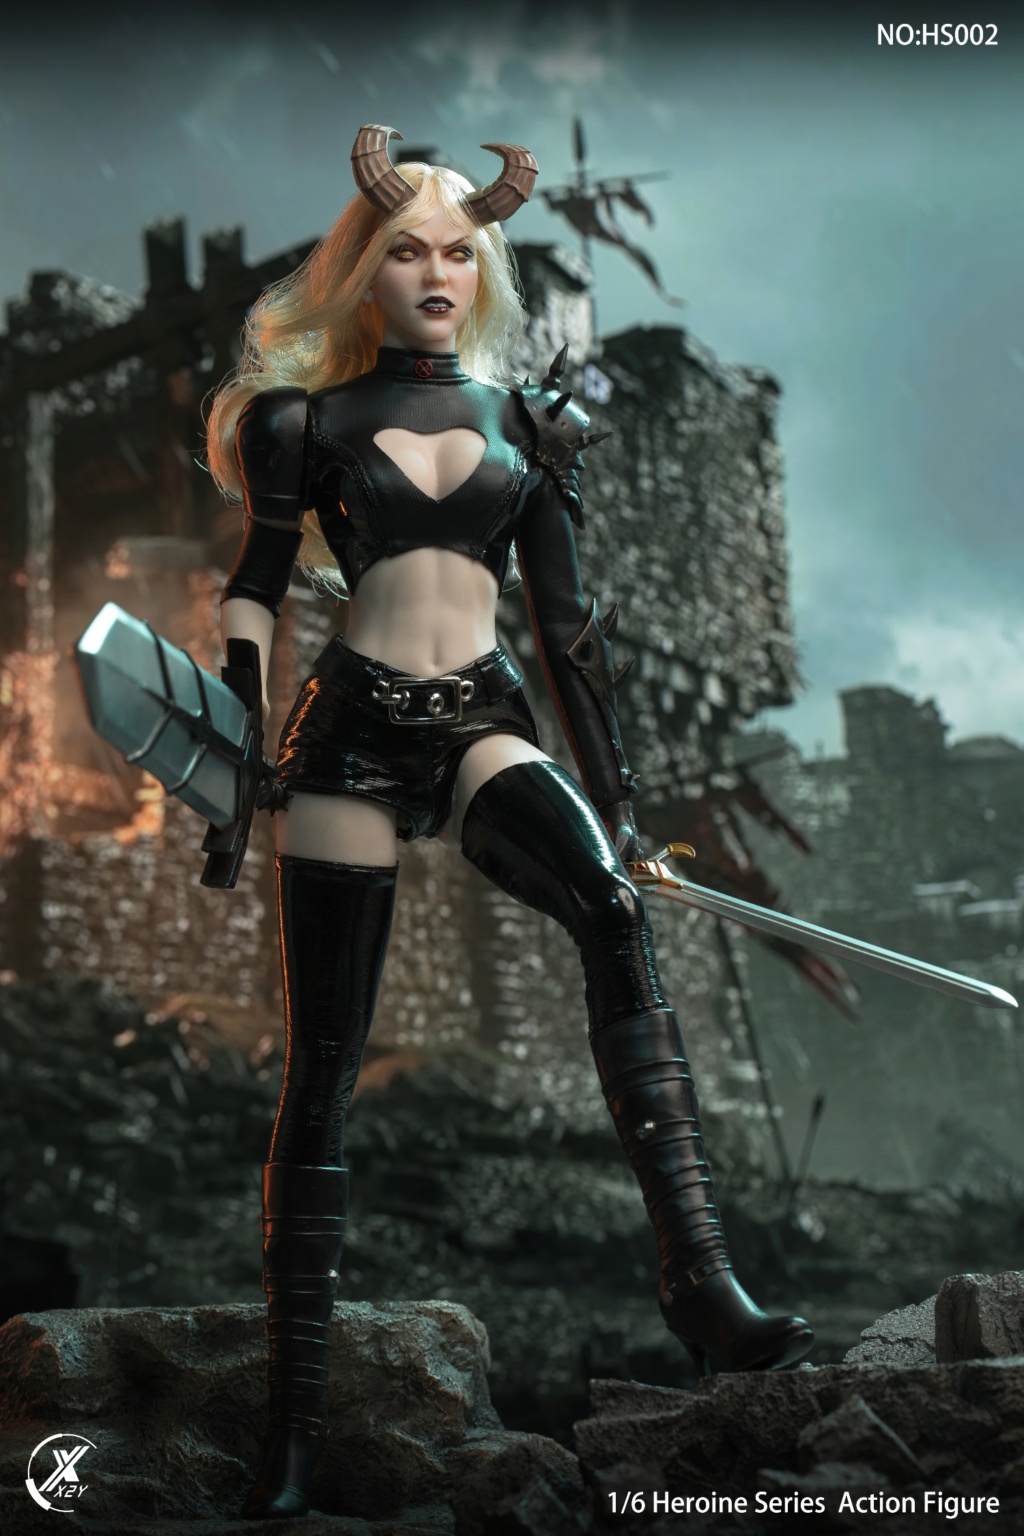 HeroineSeries - NEW PRODUCT: X2Y TOYS: 1/6 Heroine Series - Mysterious Female Warrior from Hell Double-Headed Female Doll # HS002 11200912